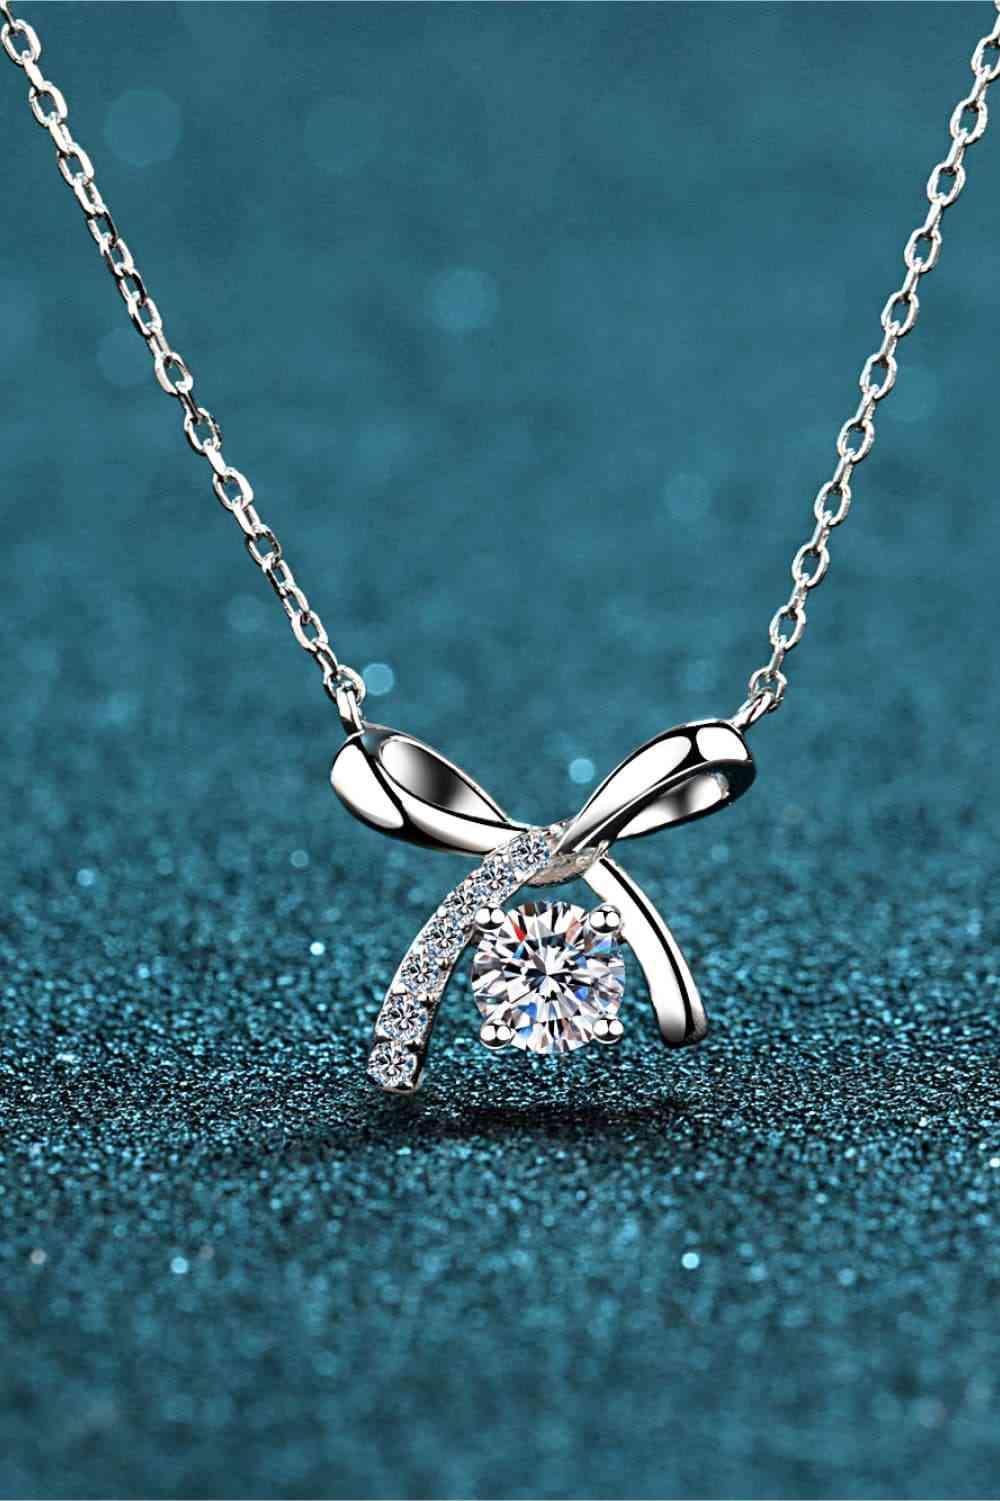 a diamond necklace with a bow on it